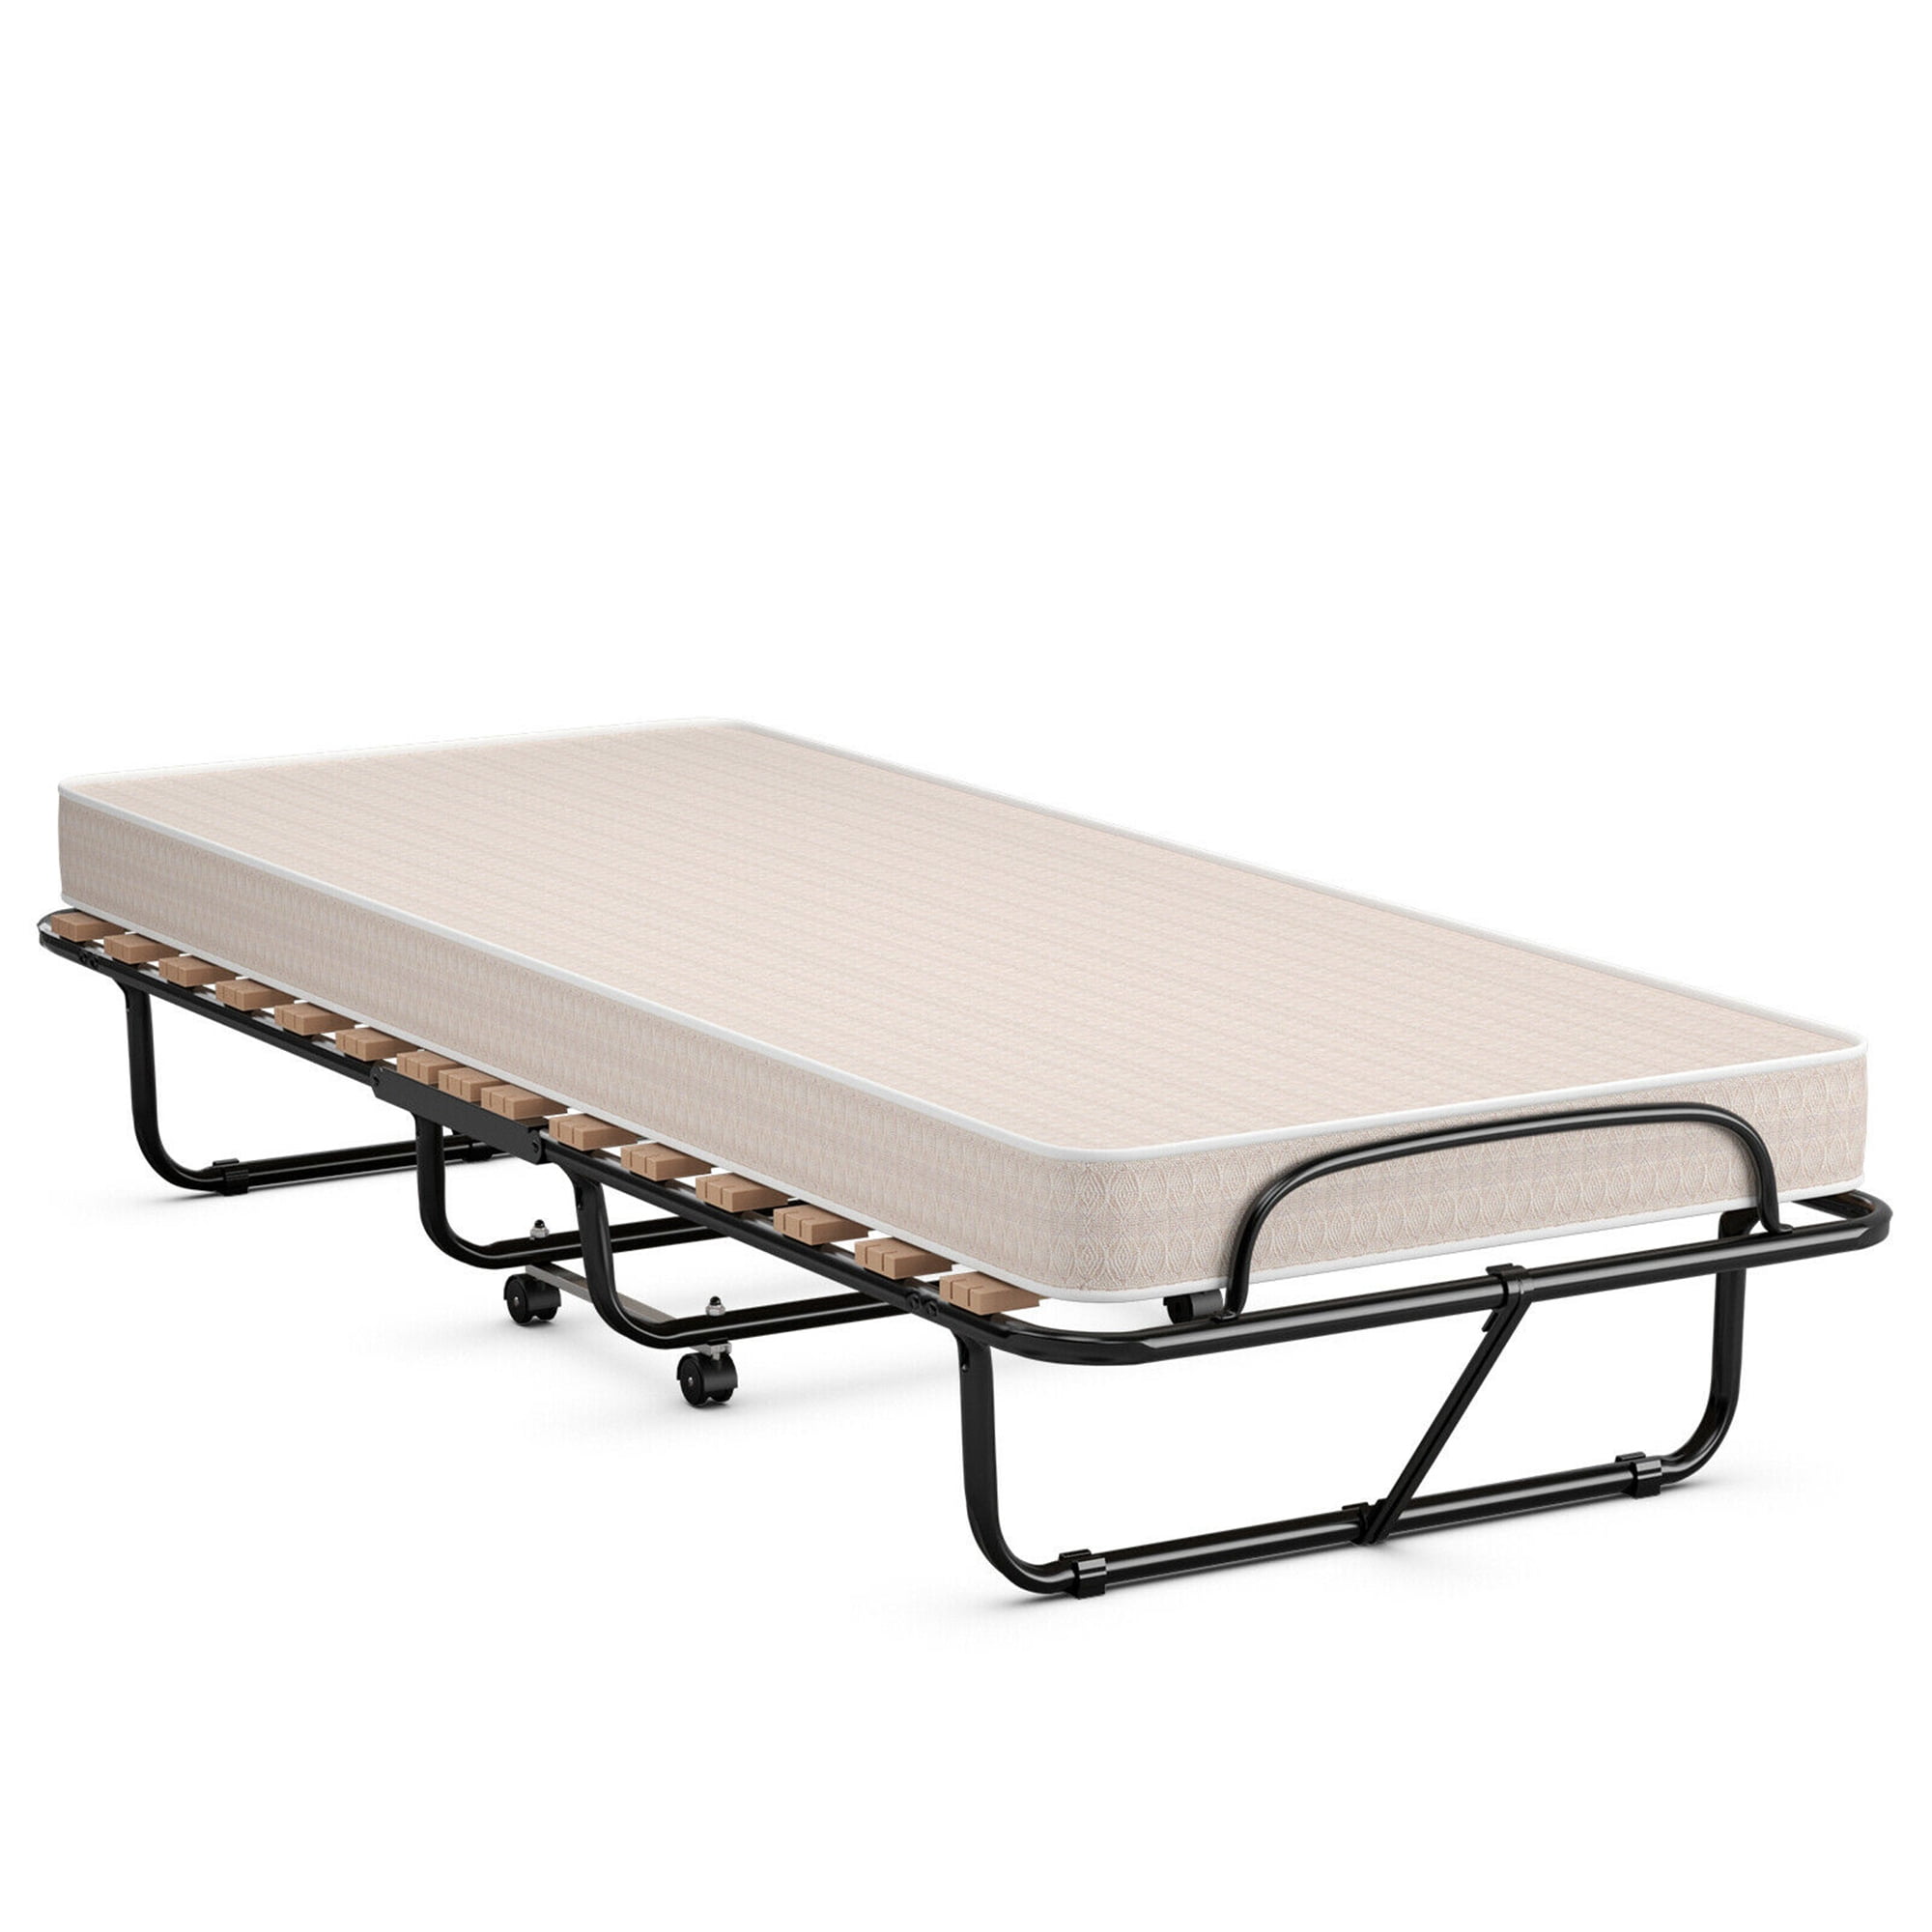 Folding Bed Cot-Sized with 4.5" Memory Foam Mattress Sleep Rollaway Space Saver 